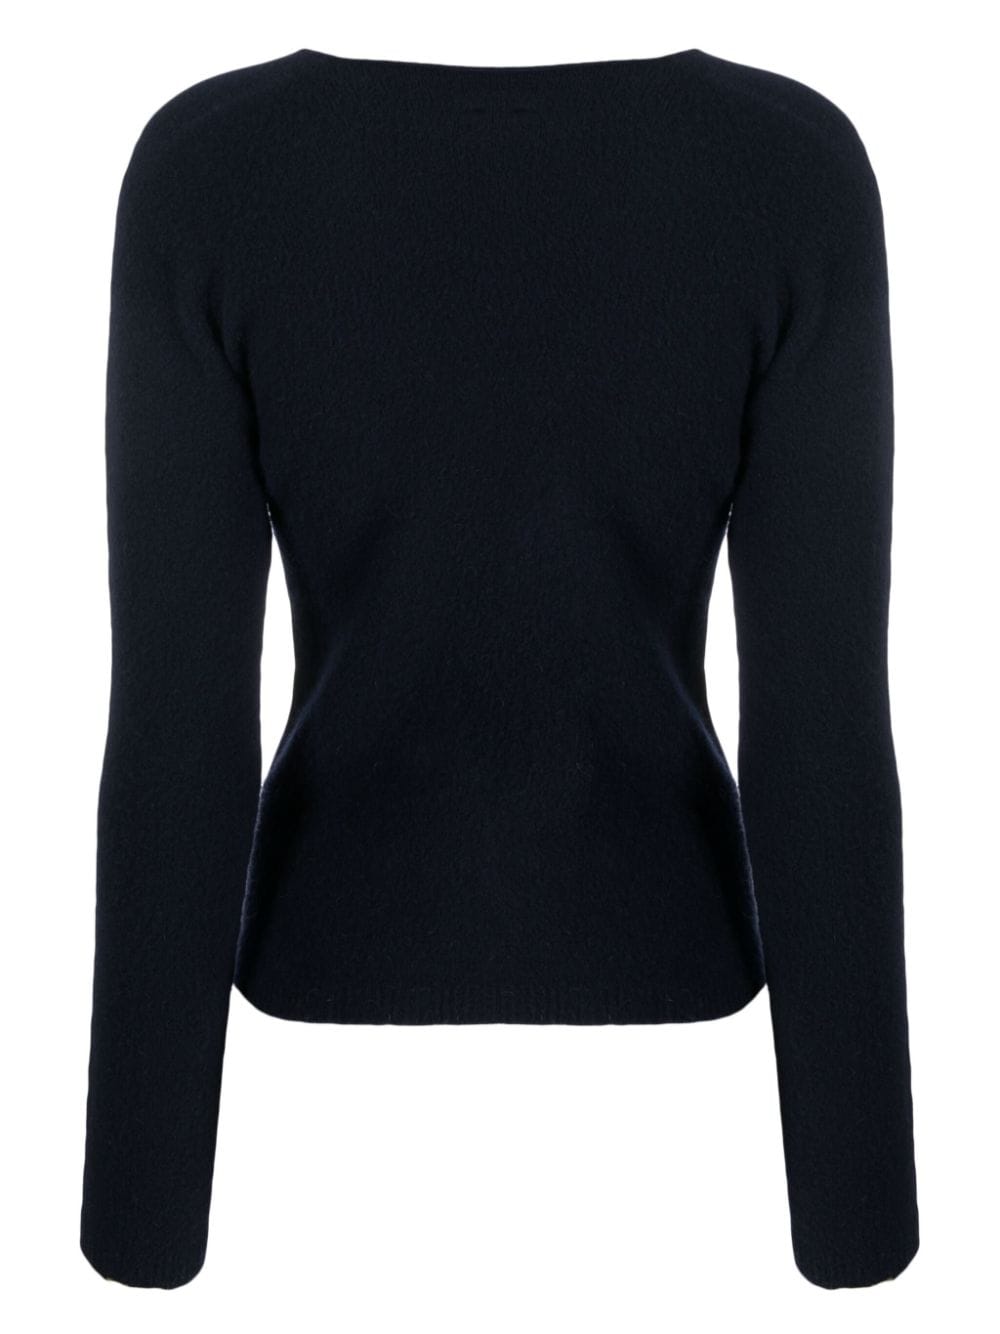 Semicouture brushed U-neck knitted top - Blauw